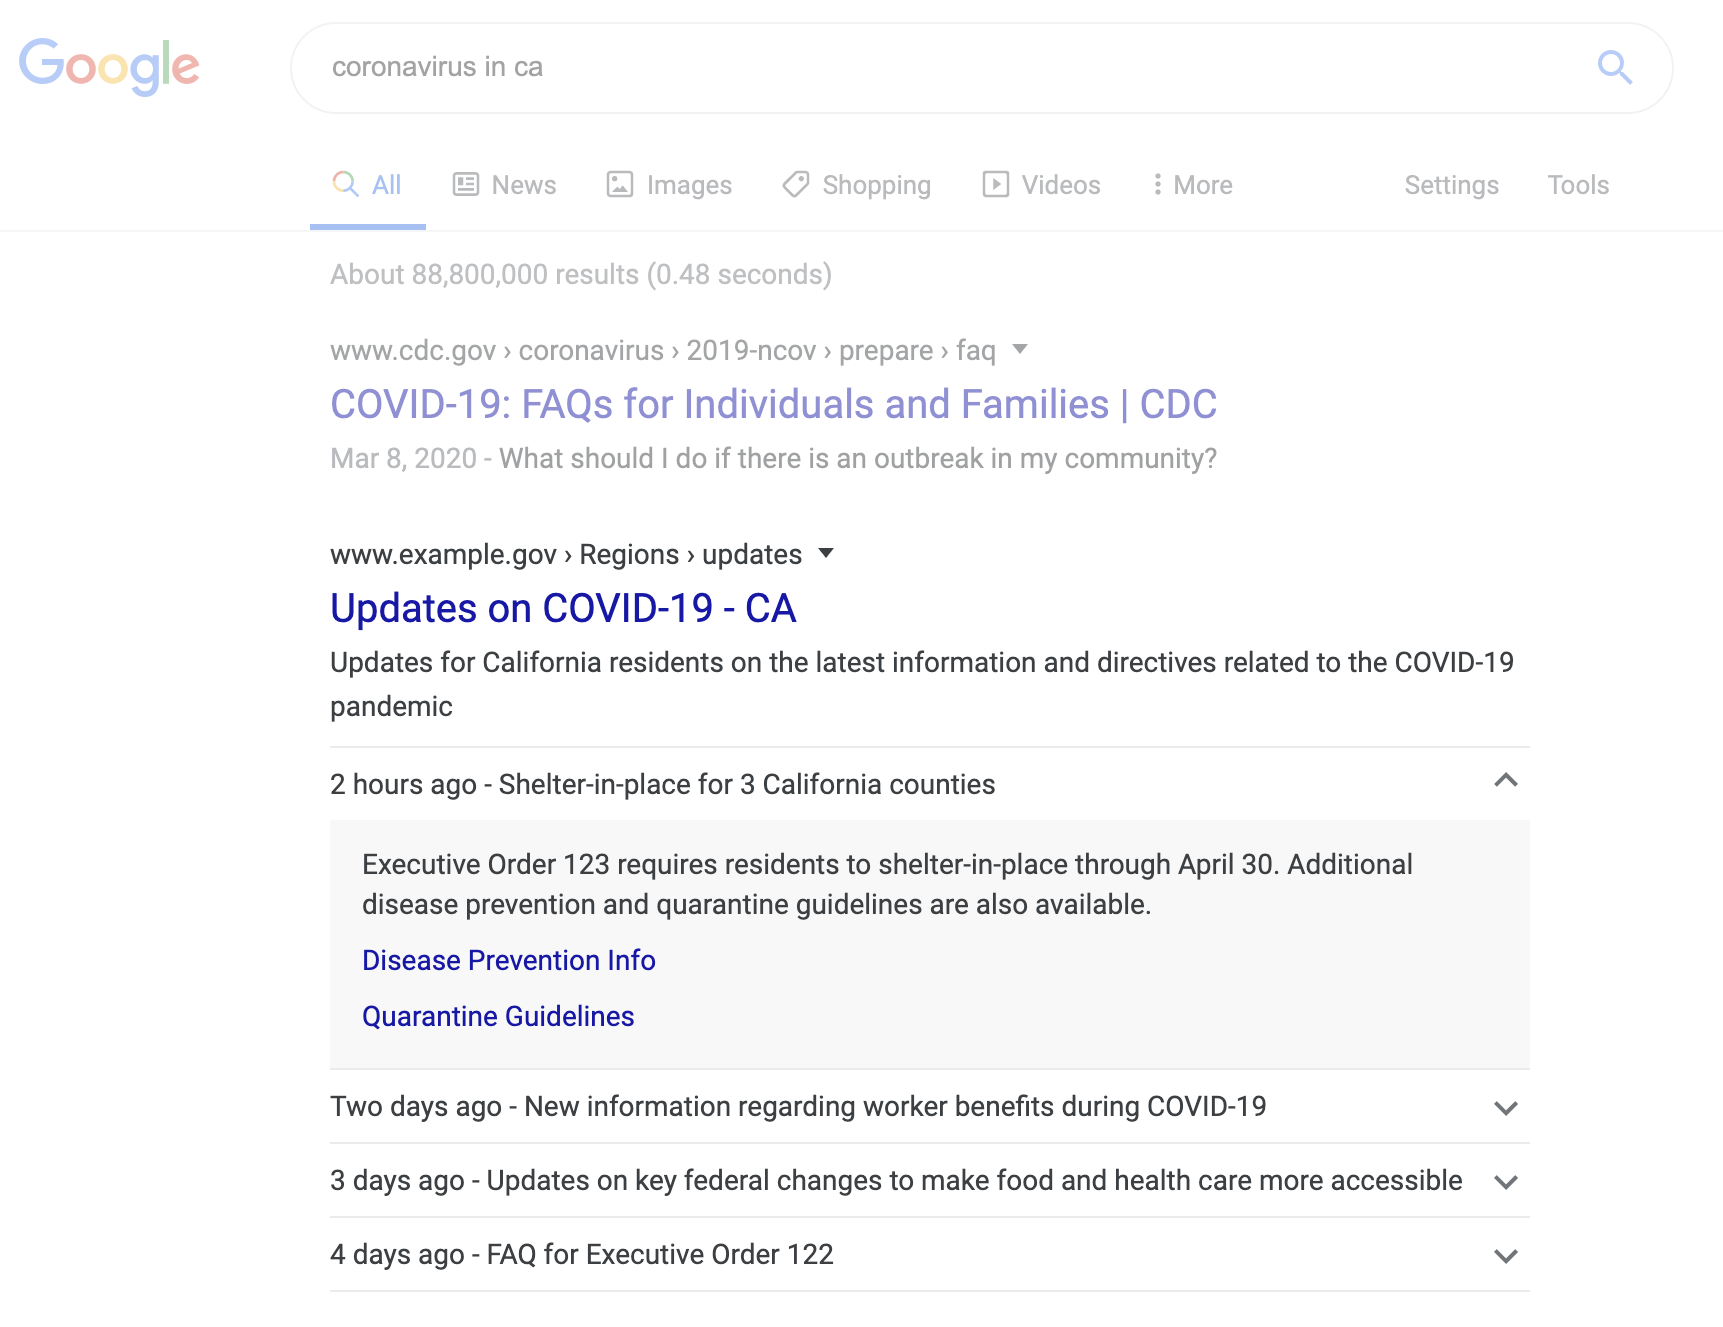 An example of a COVID-19 announcement in Google Search